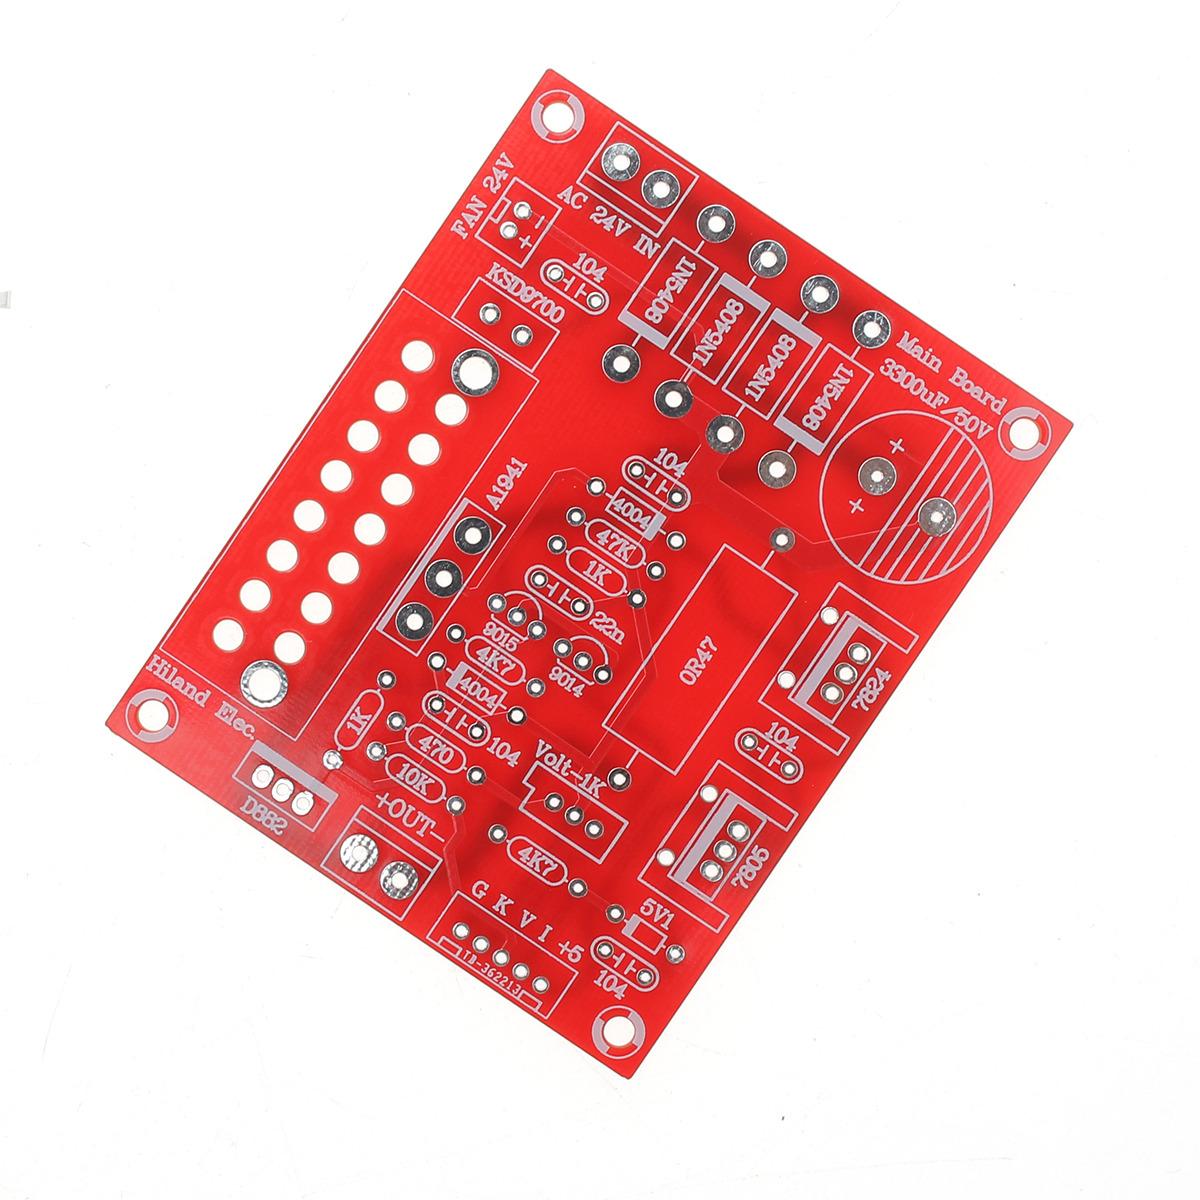 0-28V 0.01-2A Adjustable DC Regulated Power Supply Module DIY Kit Short Circuit Current Limiting Protection 12